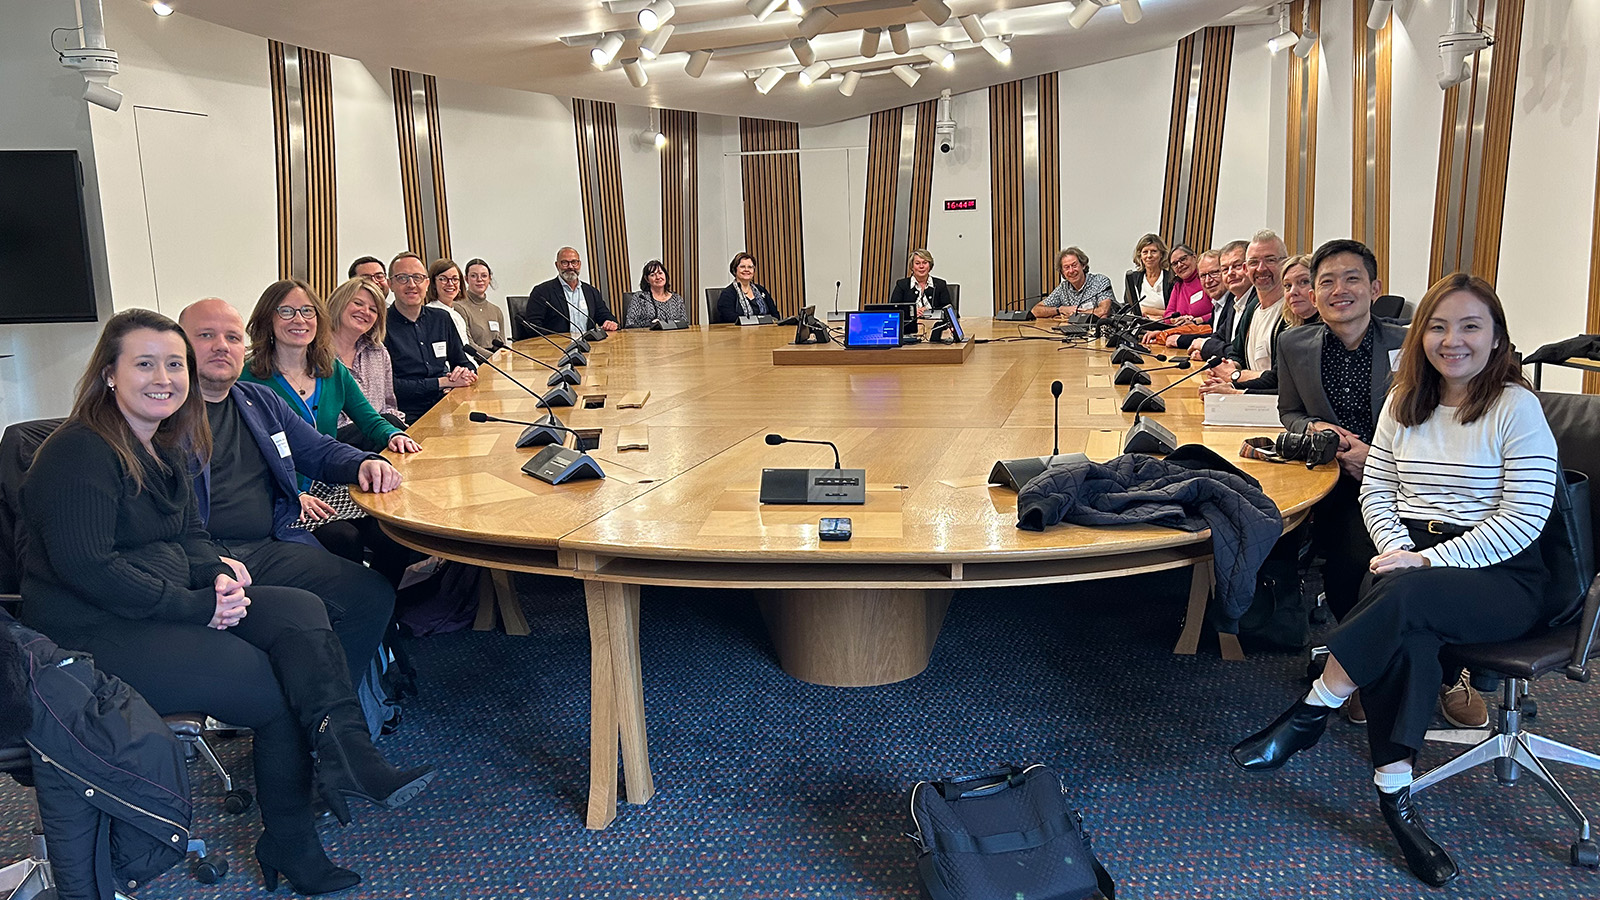 A group of people sitting together around a large wooden table inside The Scottish Parliament